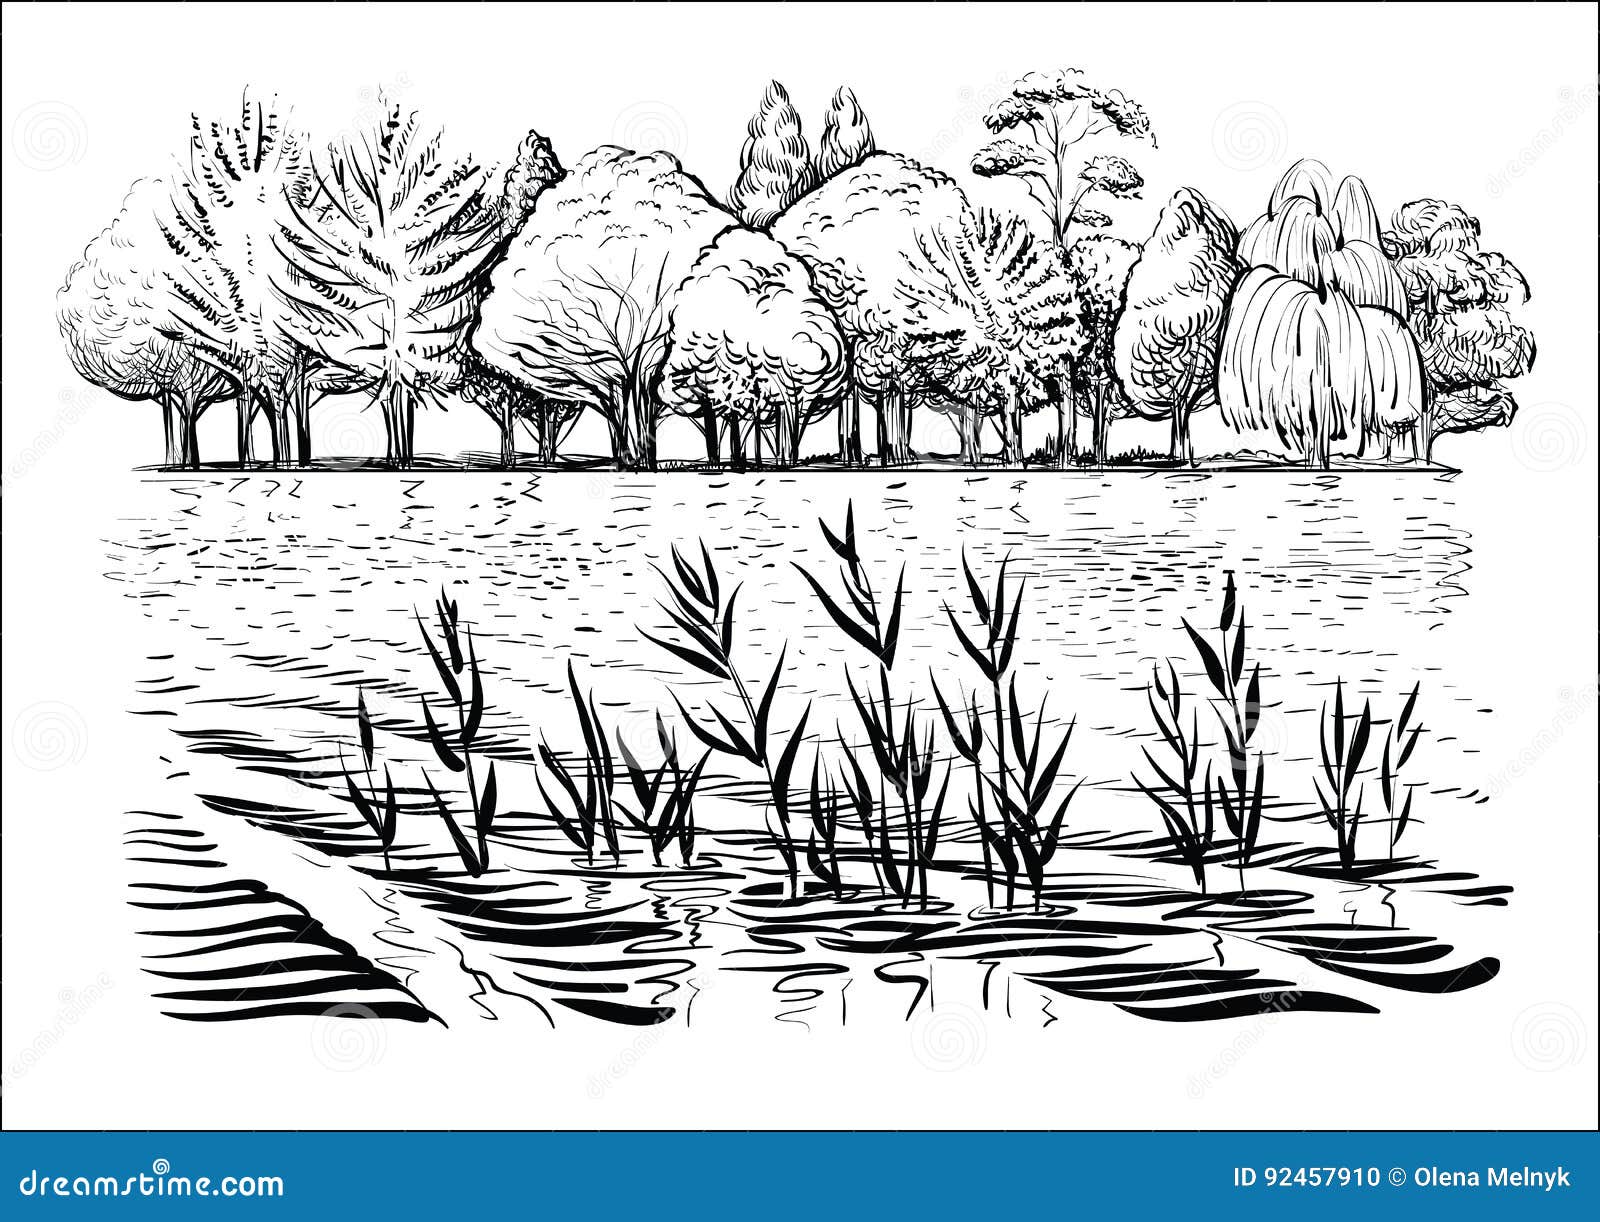   of river landscape with trees, water waves and reflexion. black and white sketch.